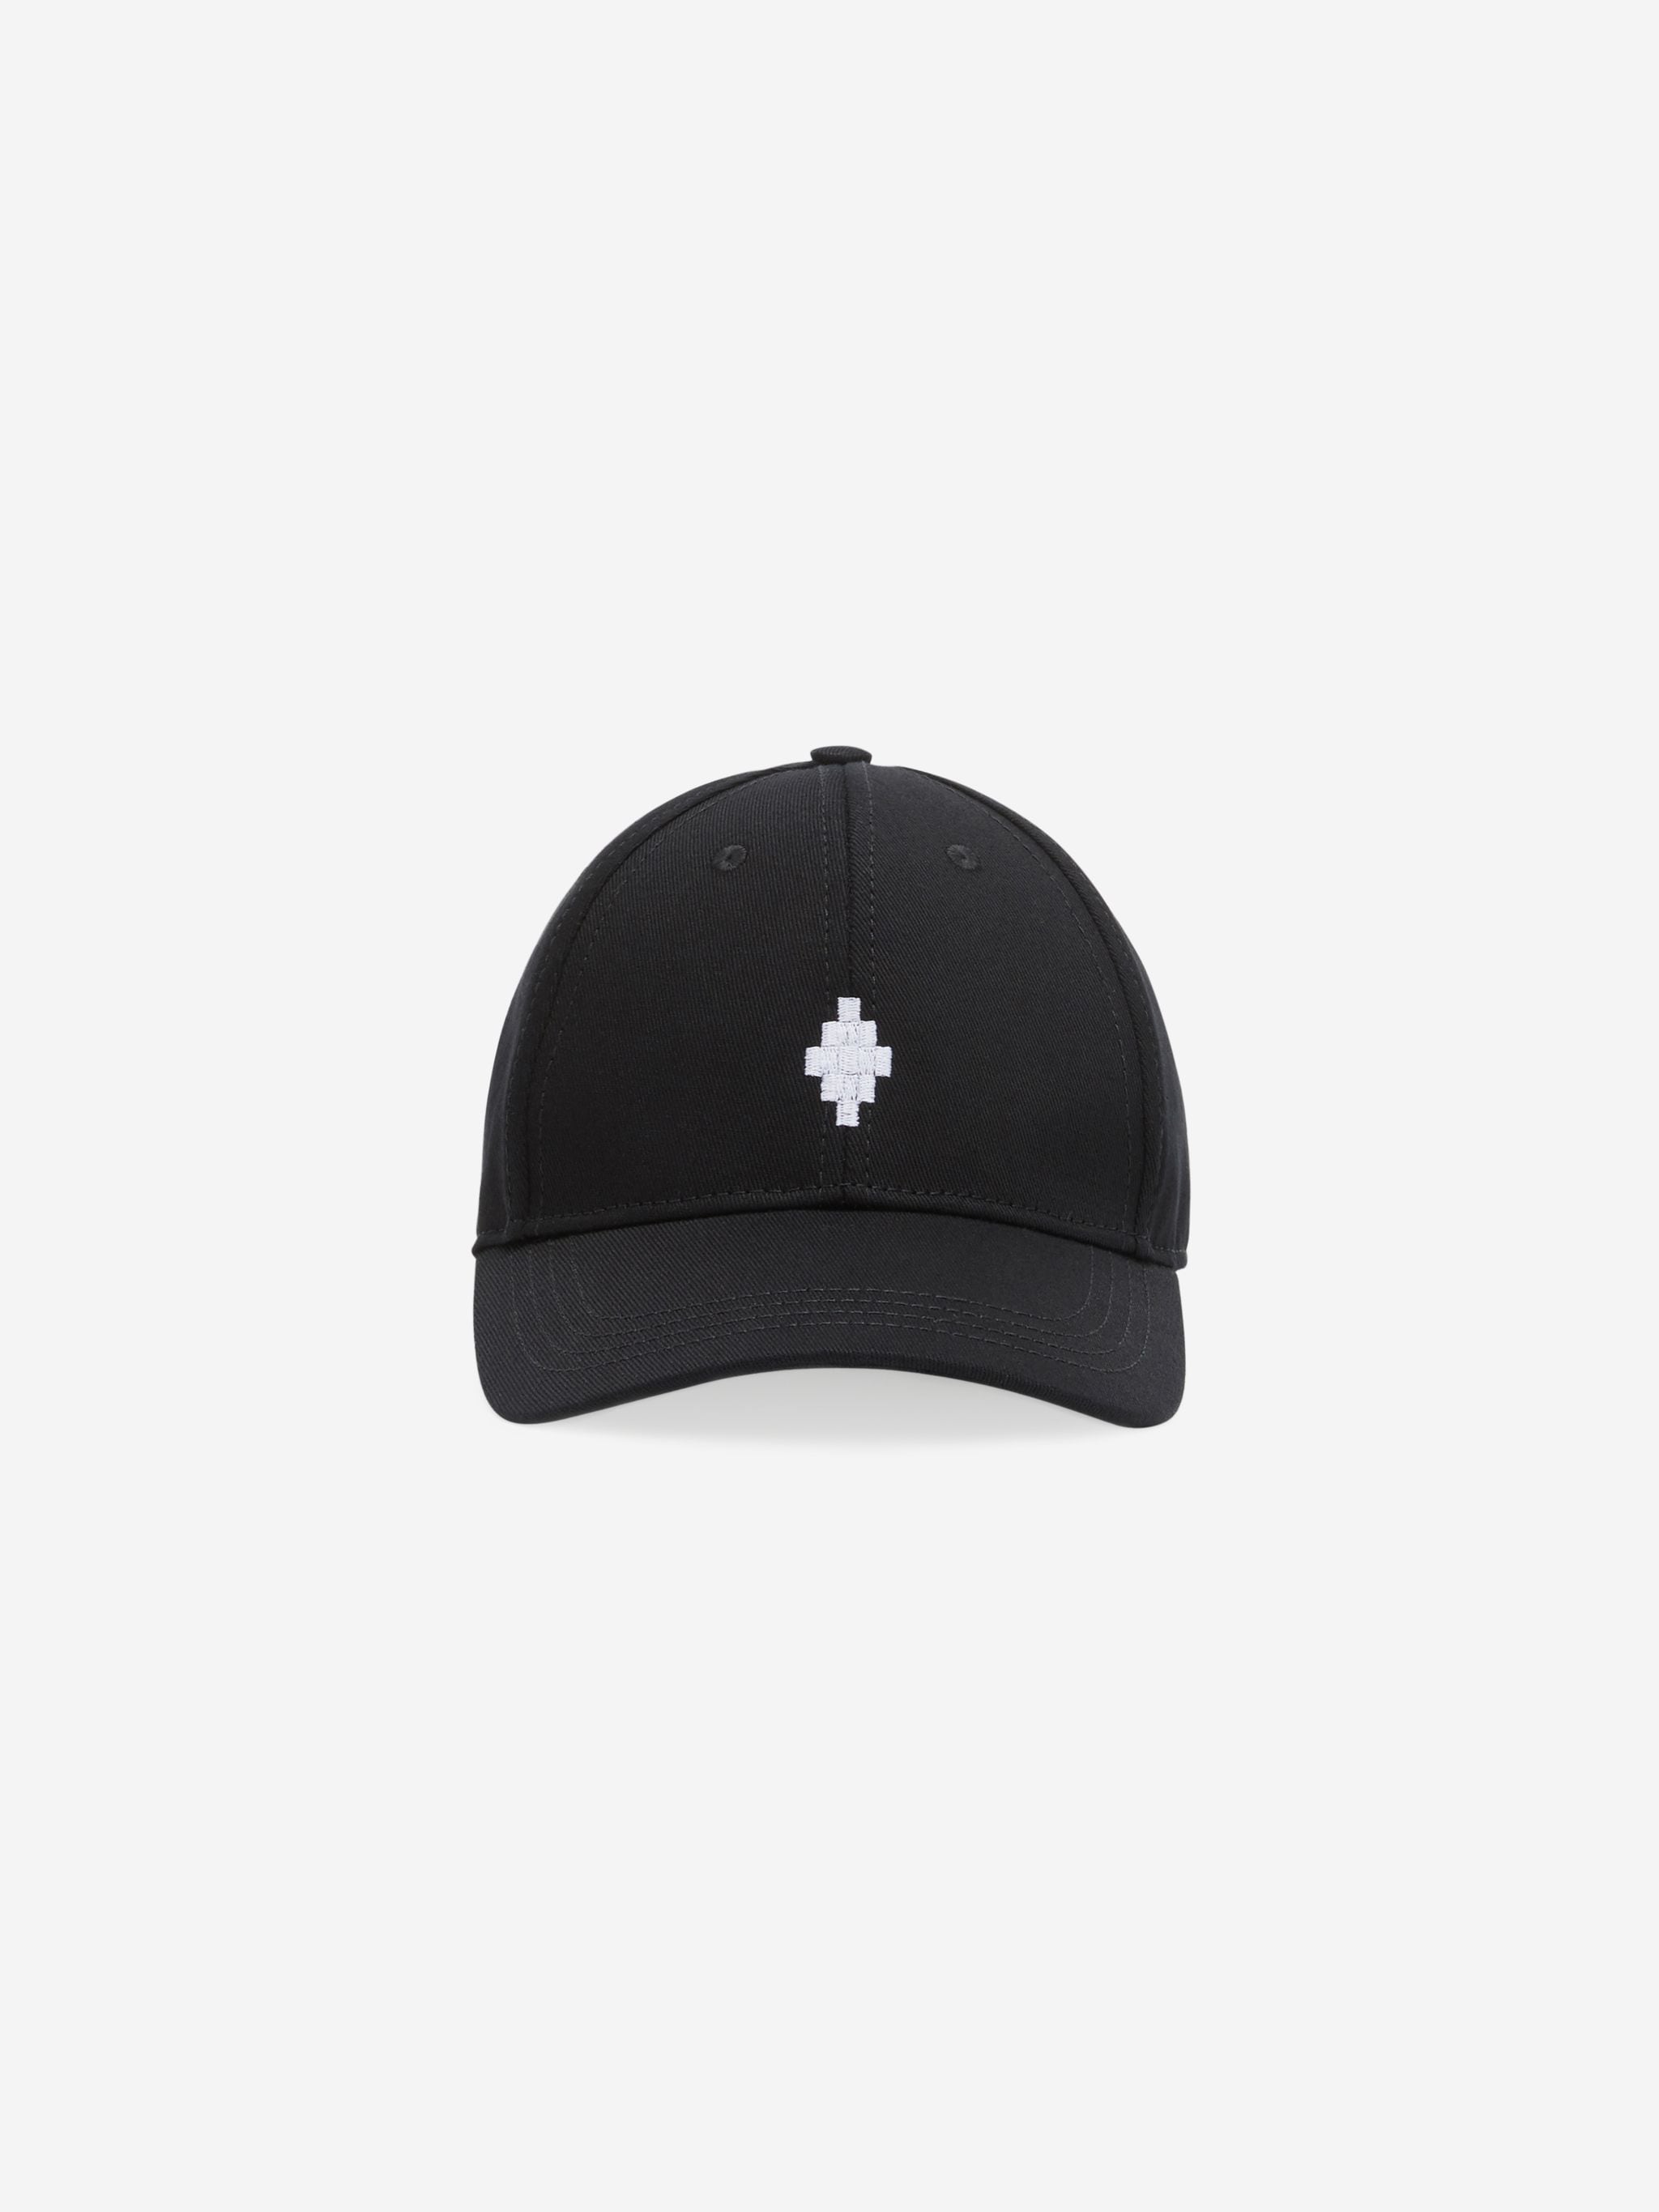 Black cotton Cross embroidery baseball cap from Marcelo Burlon Kids featuring embroidered logo to the front, curved peak, eyelet detailing and adjustable fit.